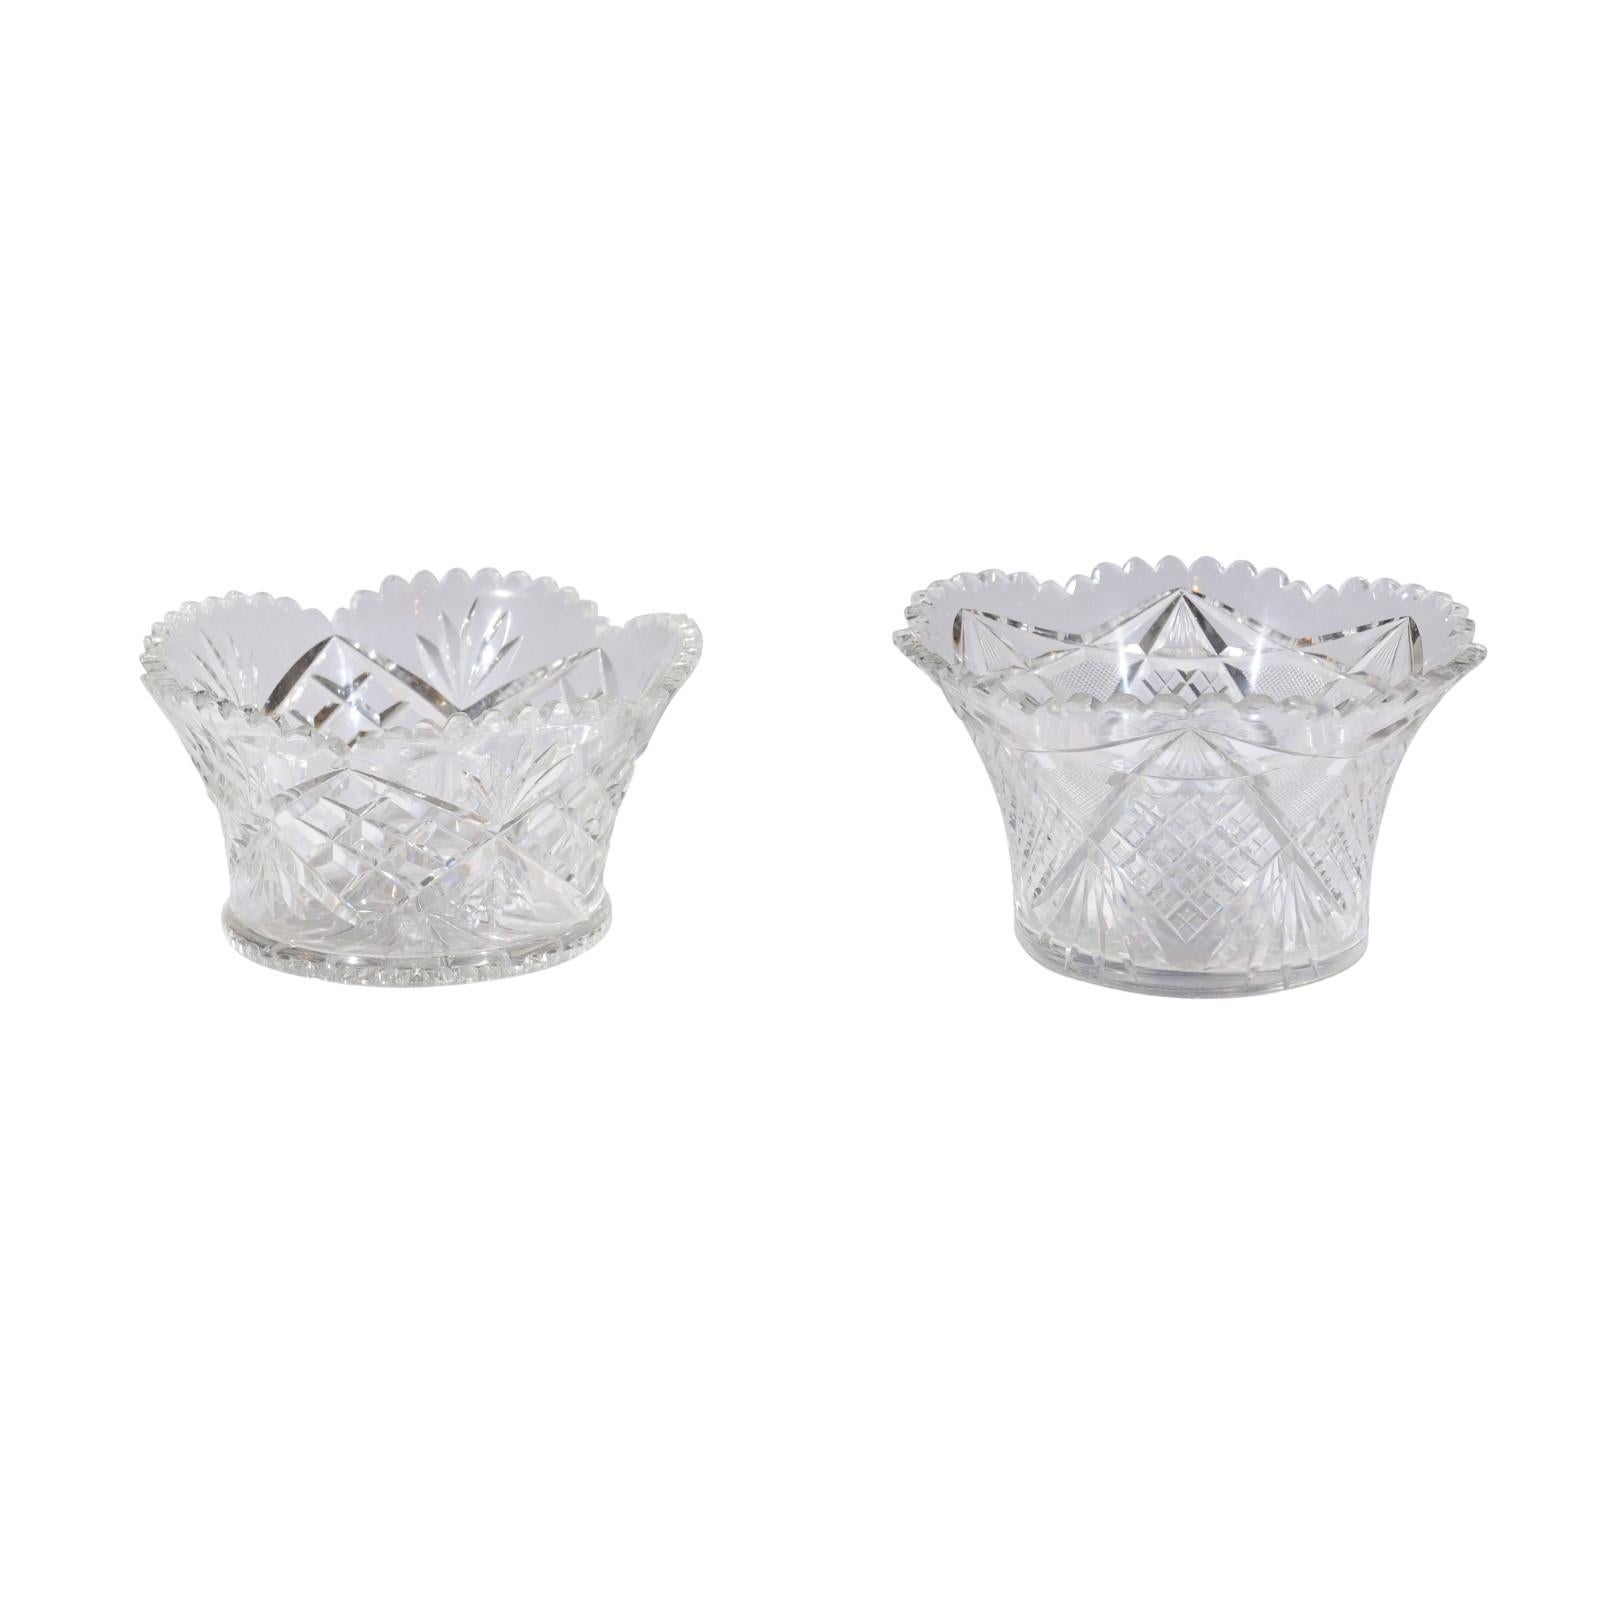 Two English turn of the century cut crystal bowls from the early 20th century, priced and sold individually. Born in the early years of the 20th century at the beginning of the reign of King Edward VII, each of these two crystal bowls features a